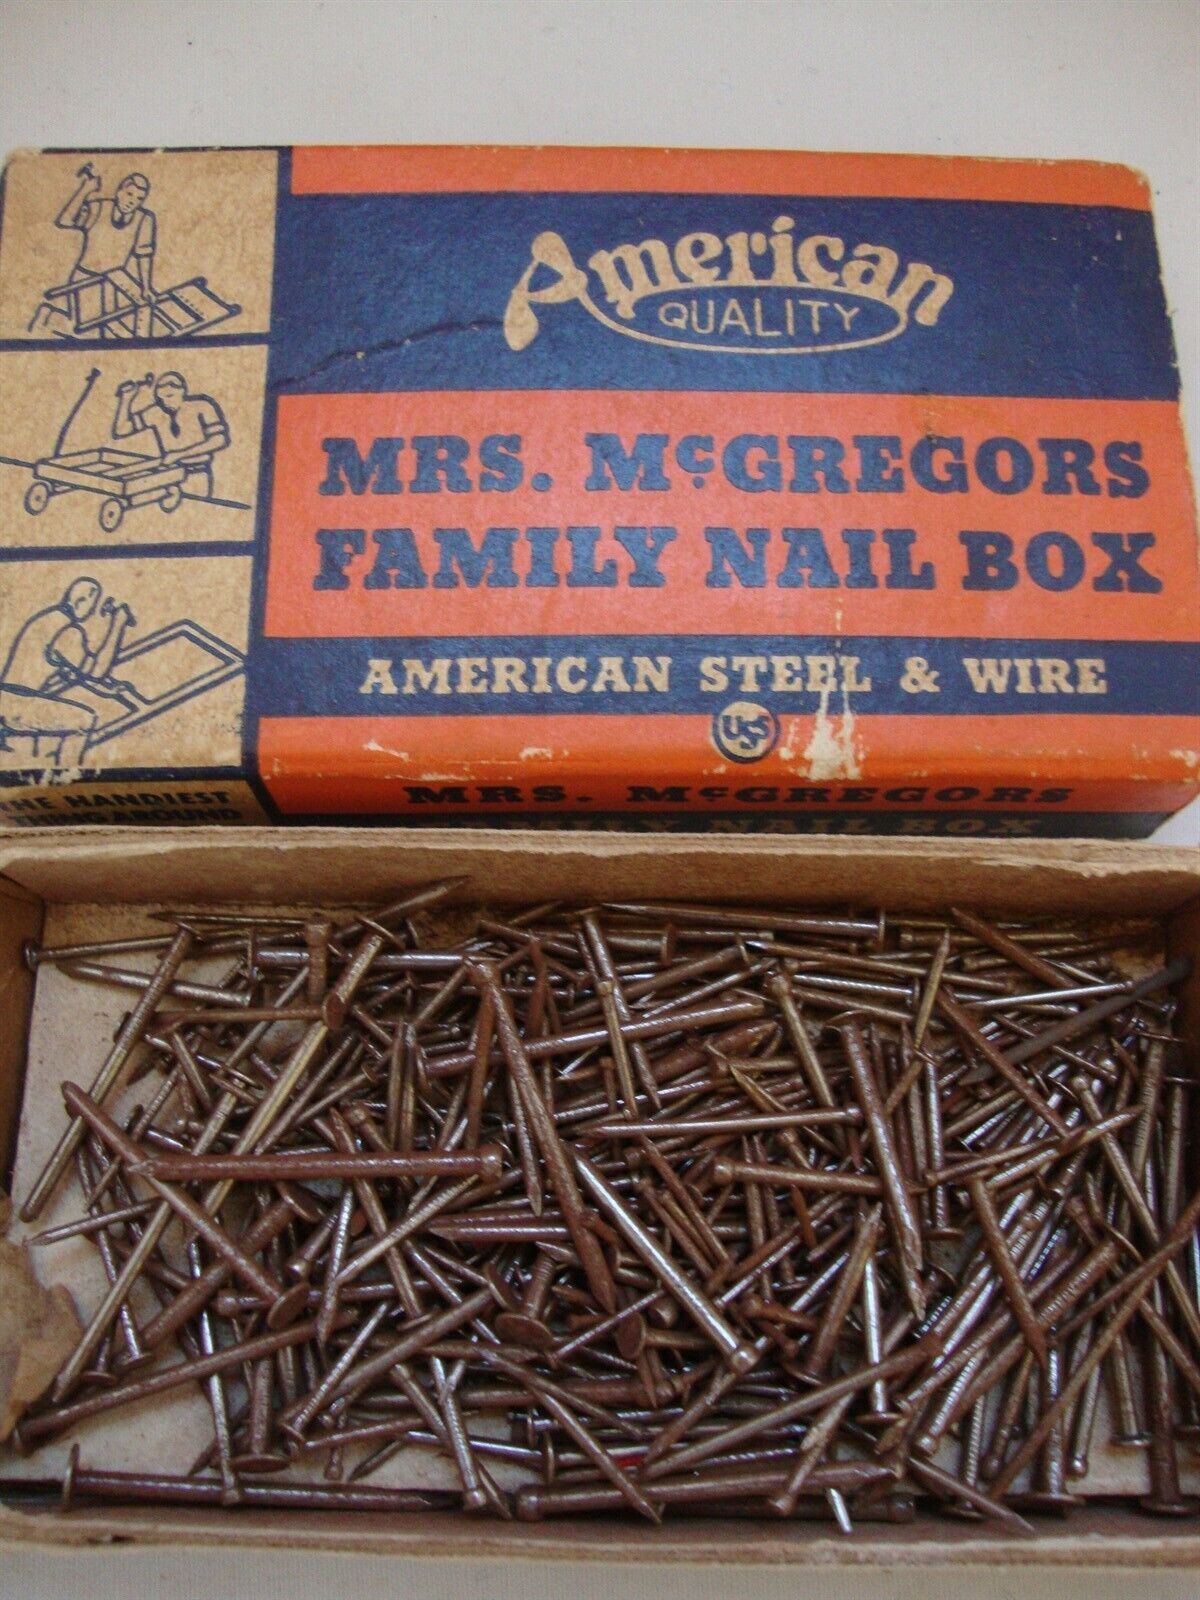 MRS McGREGORS FAMILY NAIL BOX with Nails American Steel & Wire VINTAGE